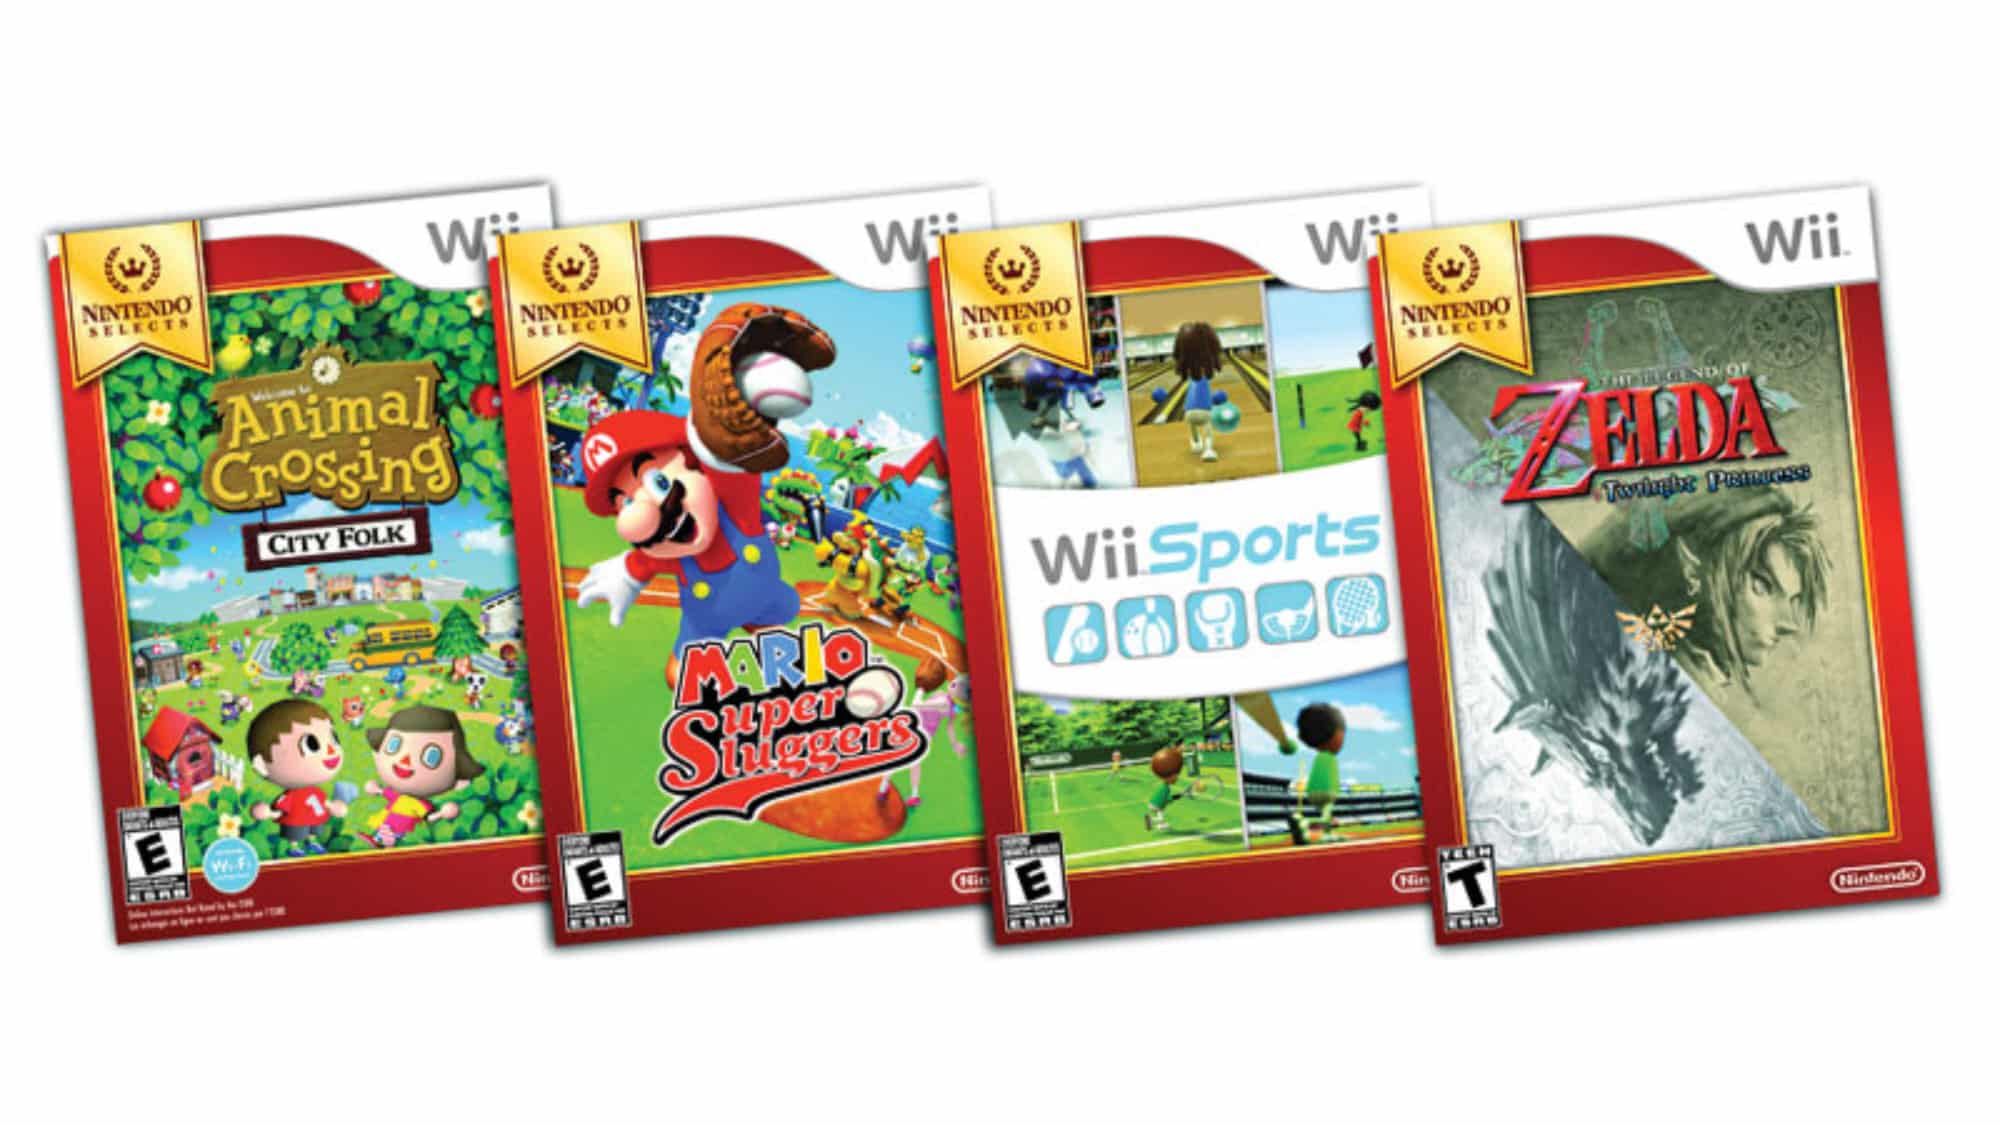 Wii Nintendo Selects discount games line revealed2000 x 1125